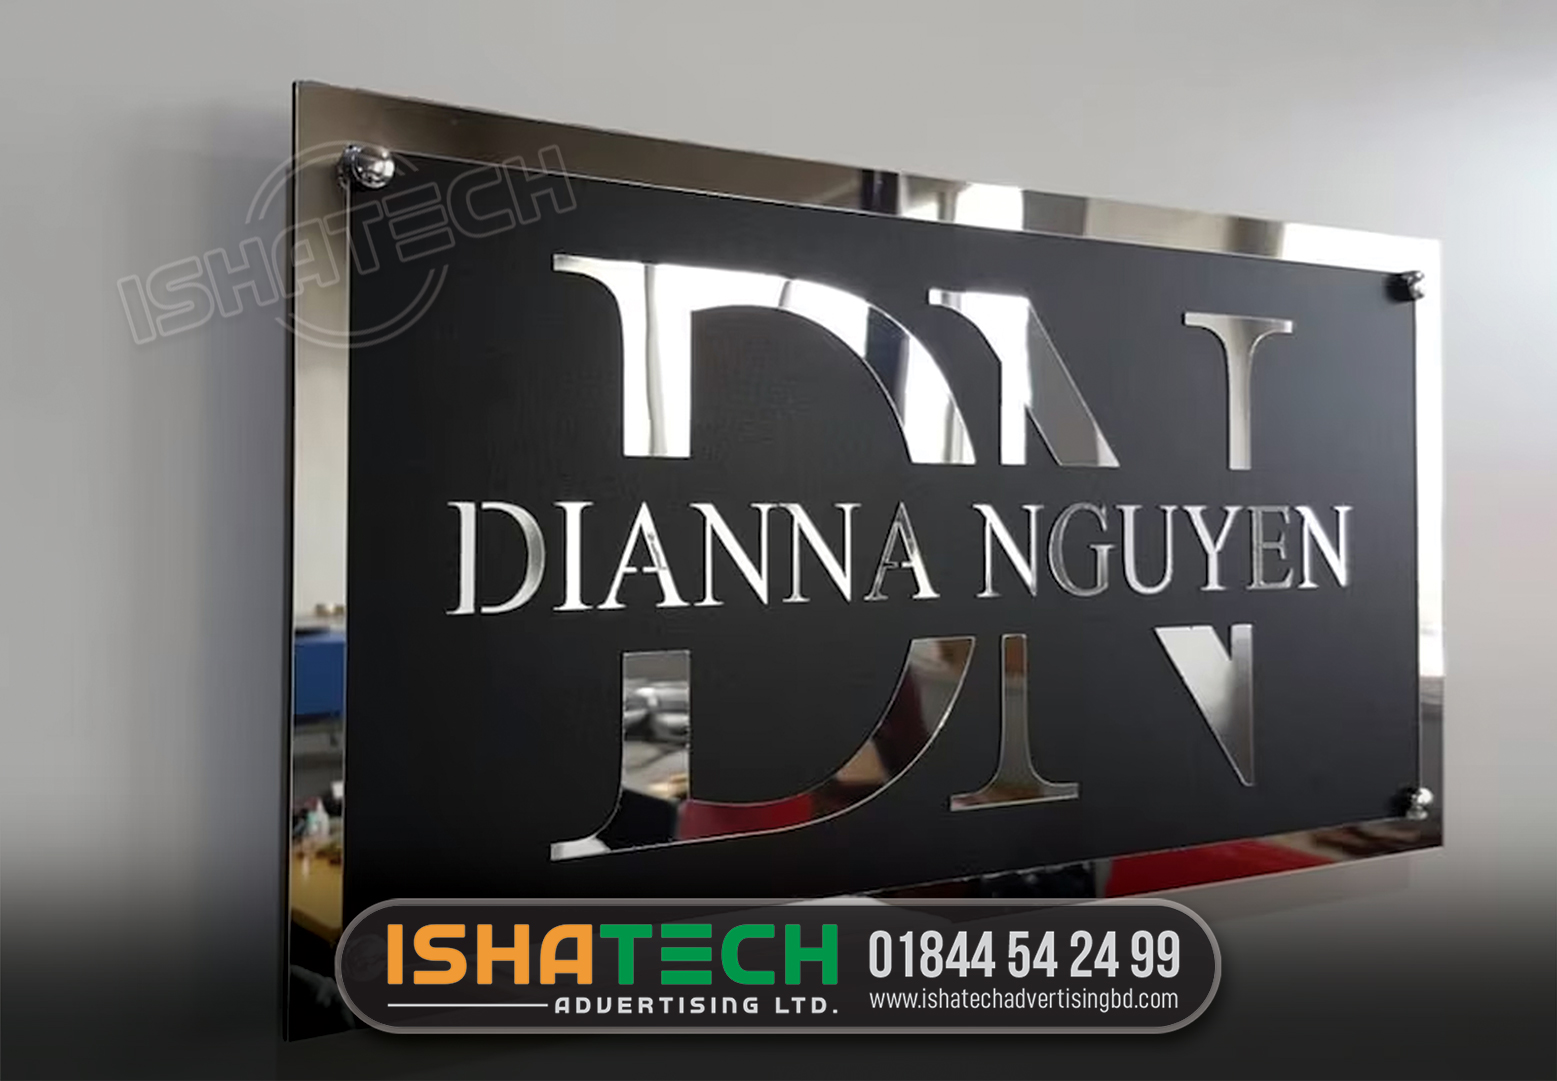 DIANNA NGUYEN DN | SS ROUND BATA MODEL LETTER SIGNS BD | BEST STAINLESS STEEL NAME PLATE MAKING BD